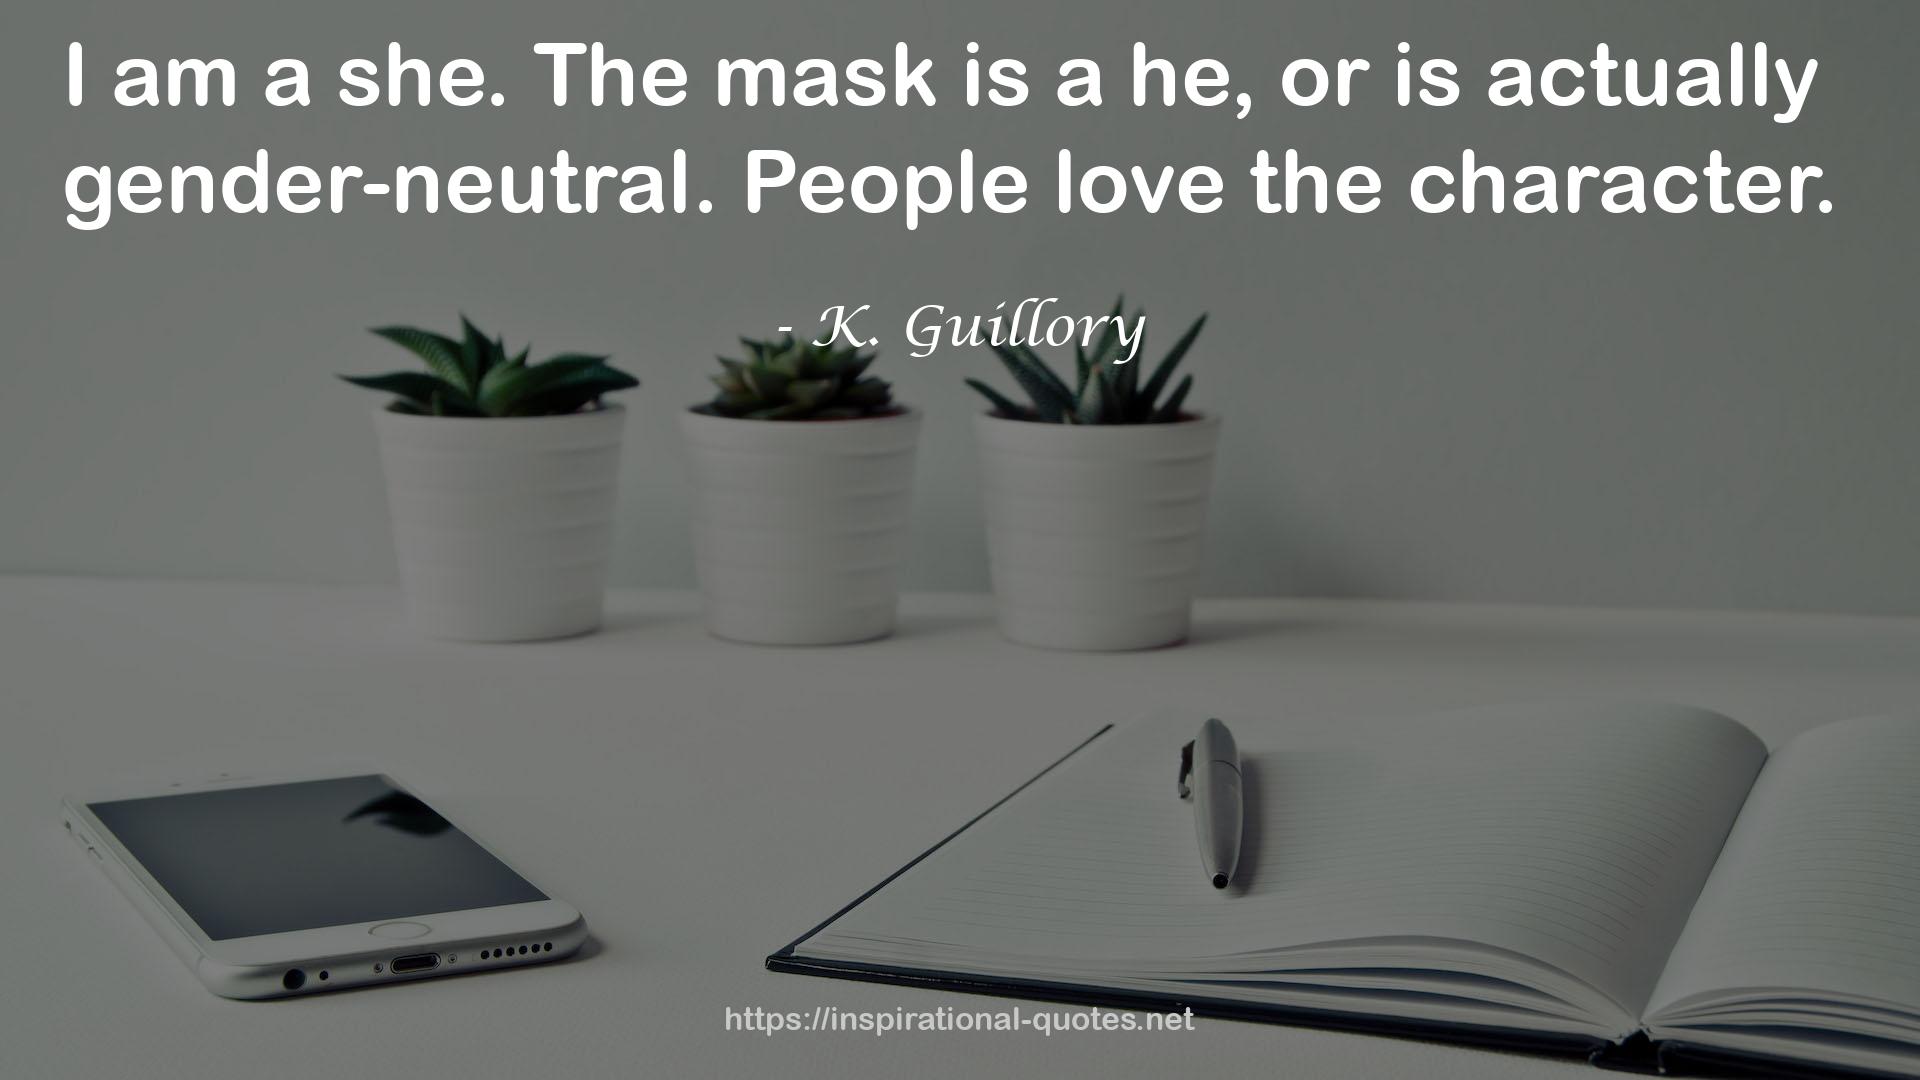 K. Guillory QUOTES